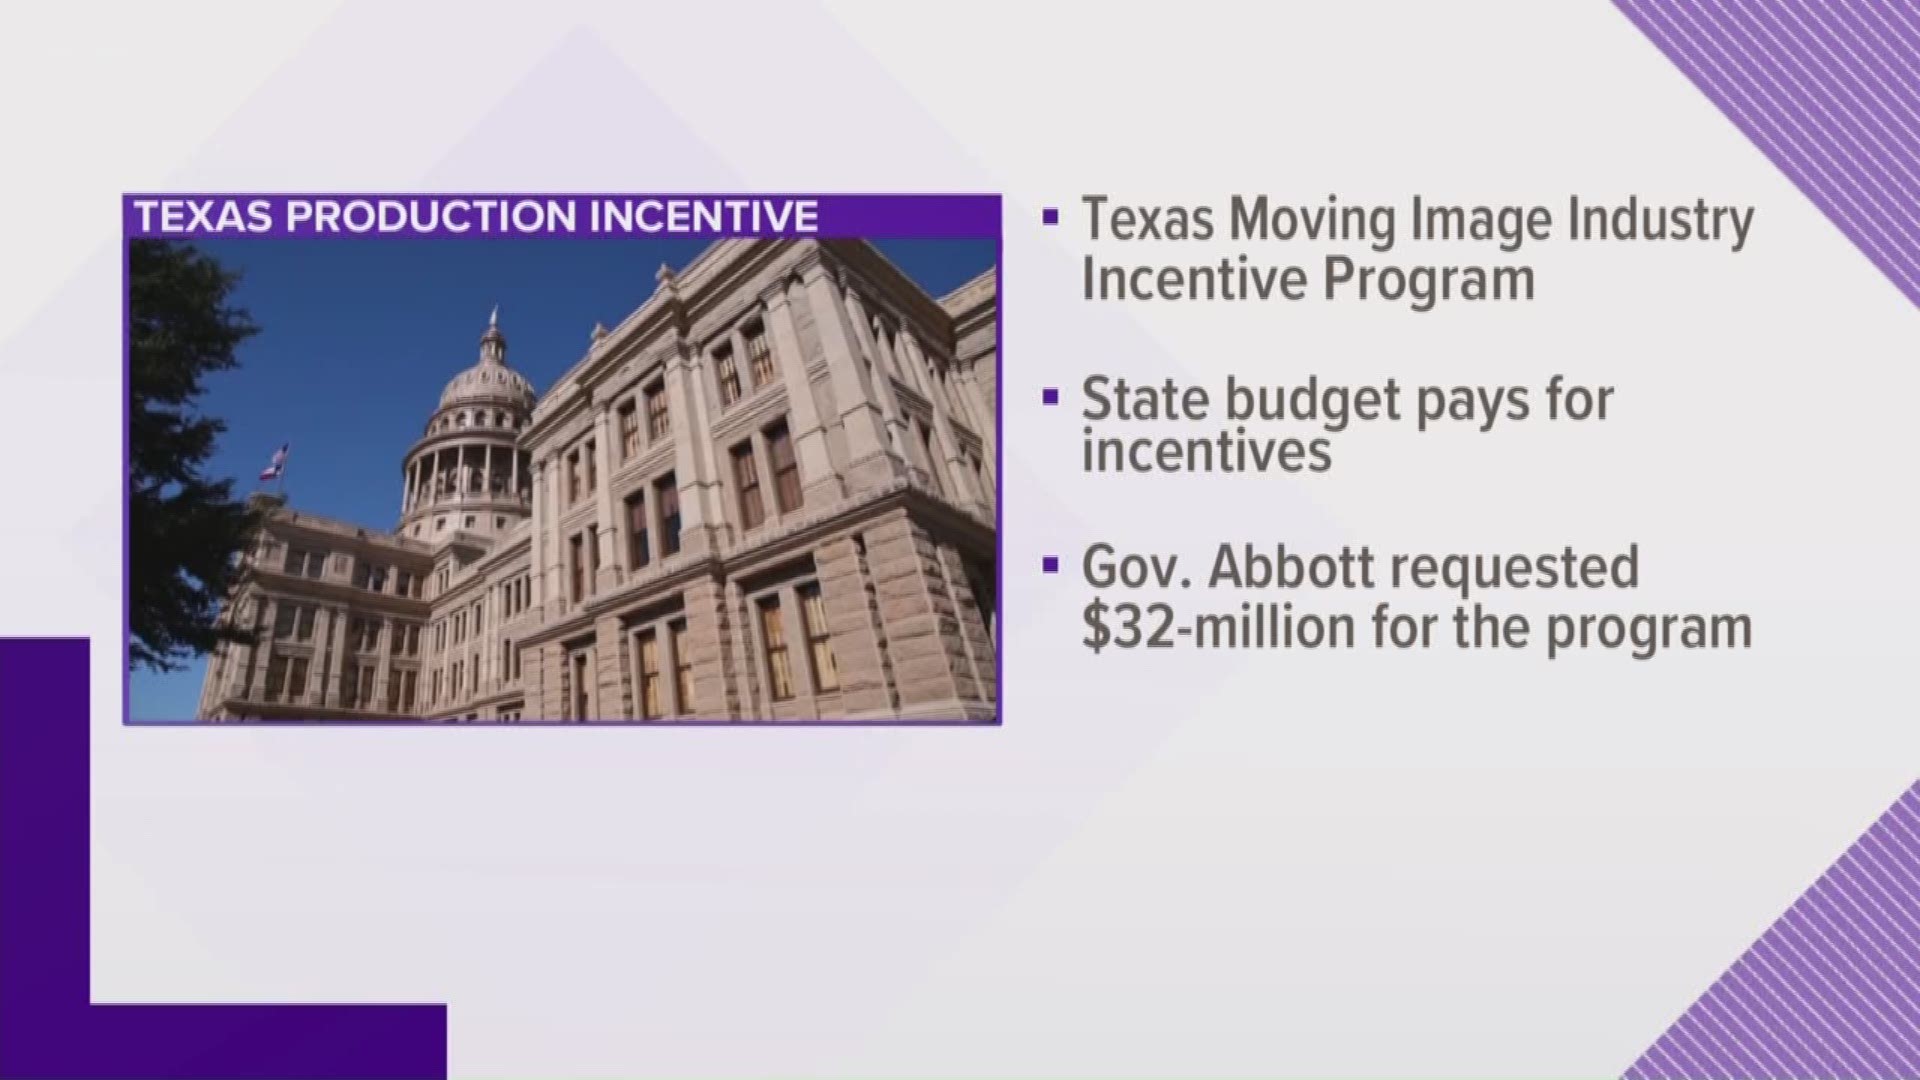 The governor requested at least $32 million for the Texas Moving Image Industry Incentive Program, which state Republicans want to see end.